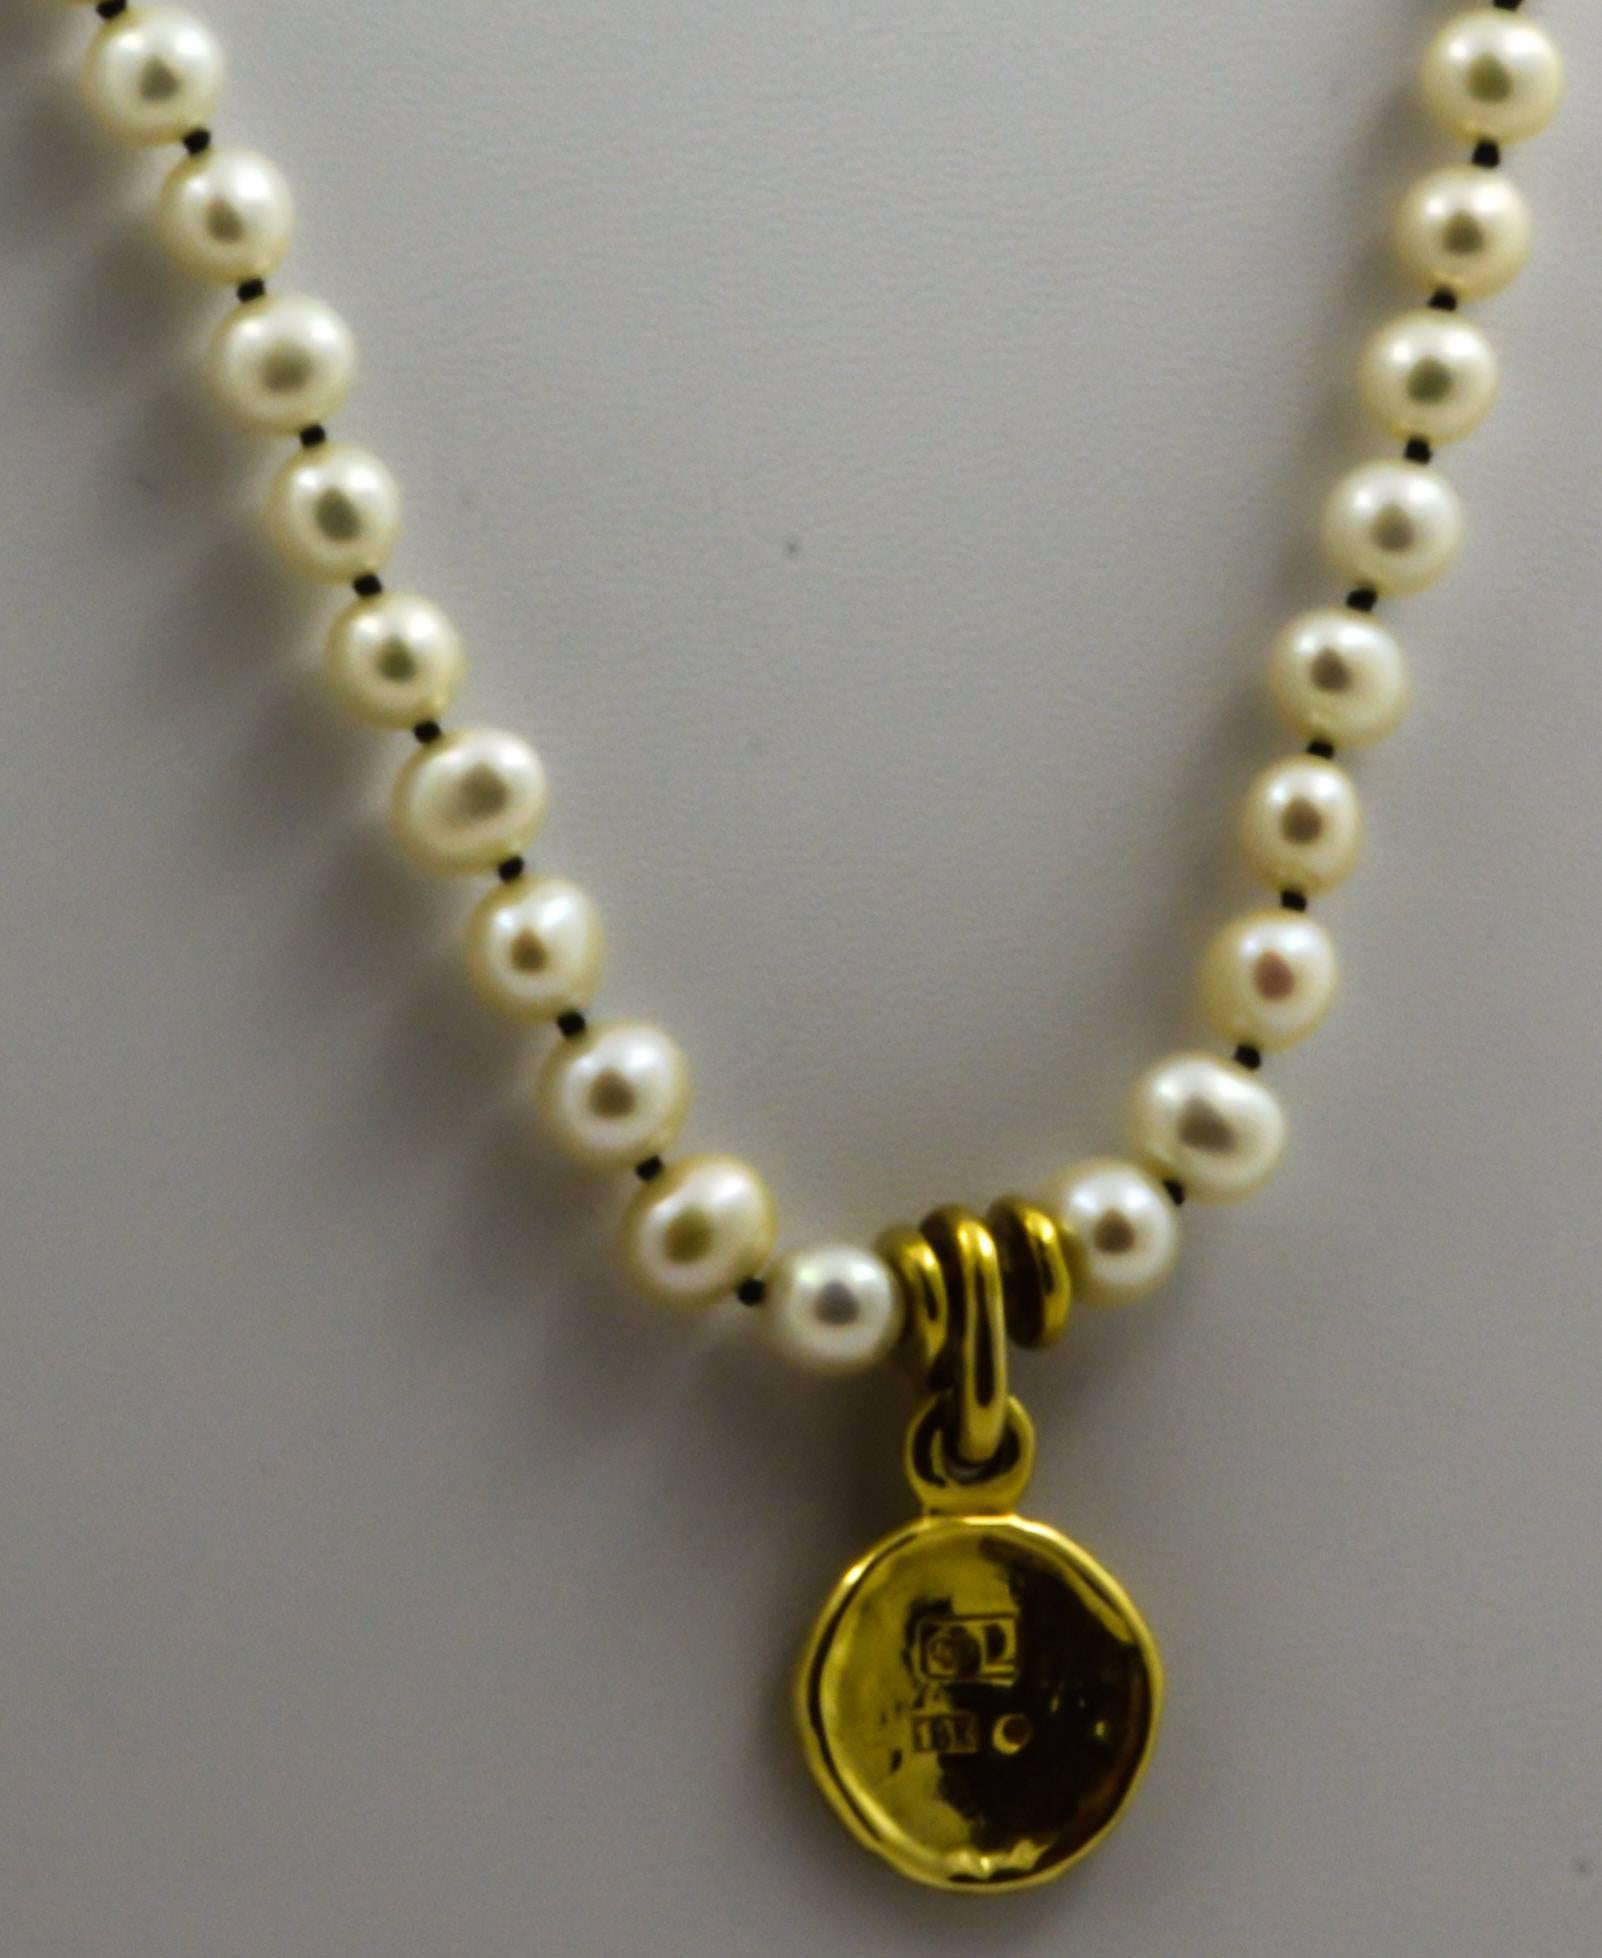 A gold coin with a rustic design is attractively displayed on a 32in tapered strand of cultured freshwater pearls in this unique pendant. Tapering from 6.86mm at the pendant to 3.65mm at the clasp, the pearls are strung on a contrasting black cord